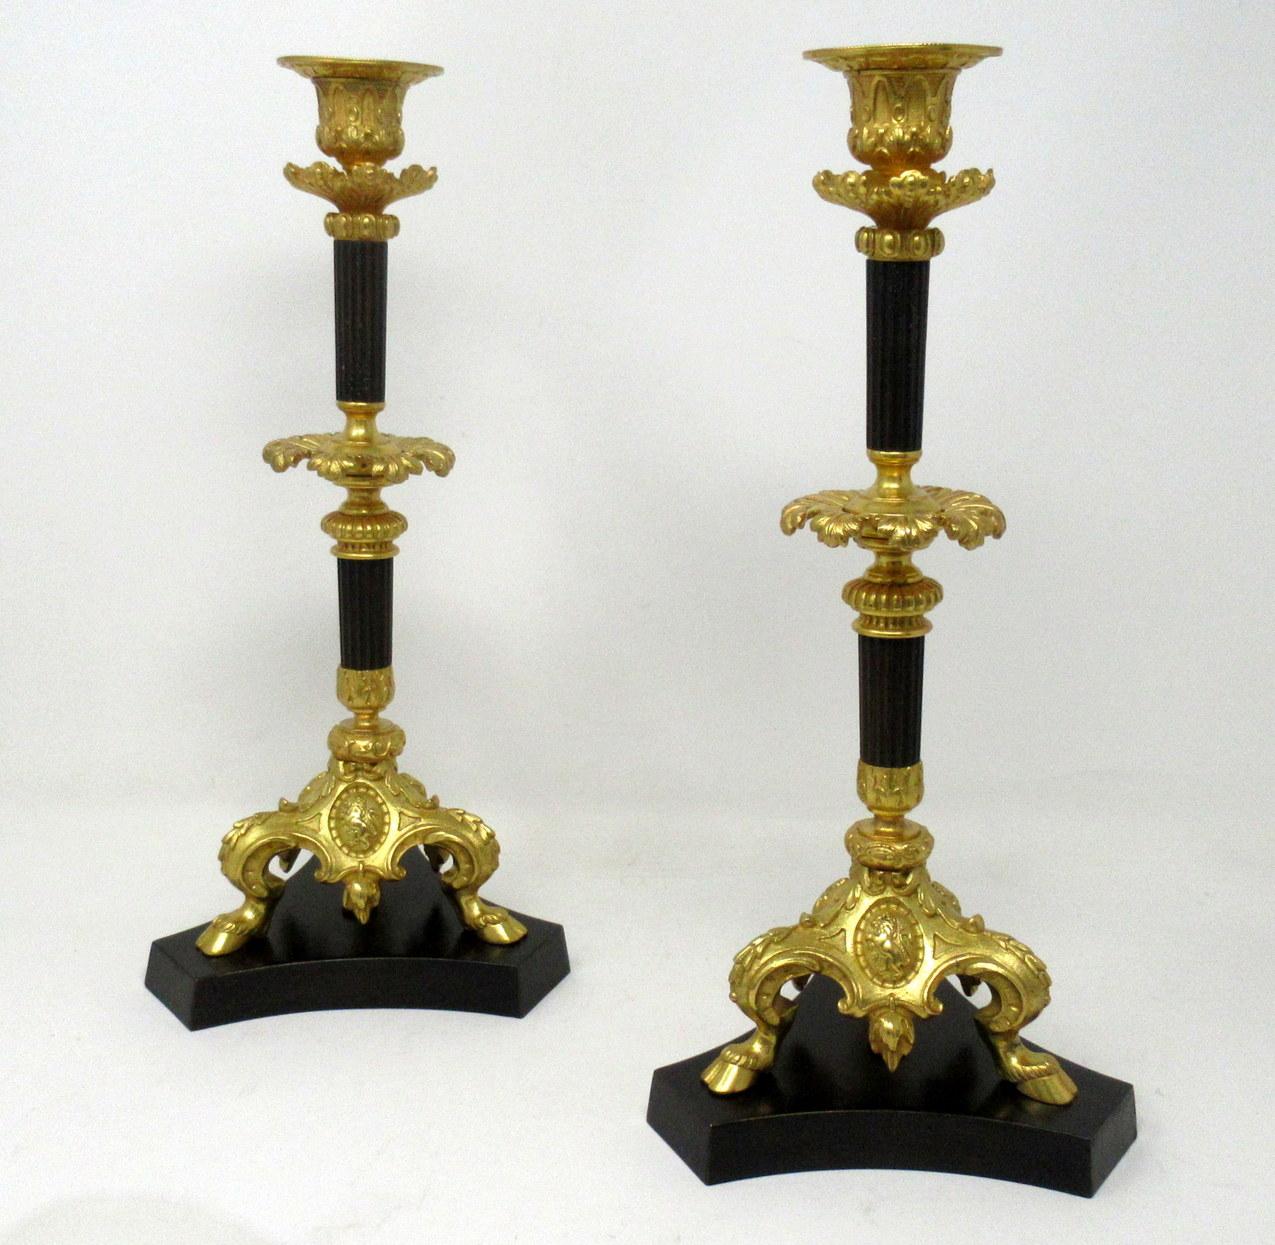 Stunning pair of French heavy gauge ormolu and patinated bronze single light candlesticks of outstanding quality and of generous tall proportions.

Each having a Campana-form candle socket with original firm fitting plain drip pan. The elegant